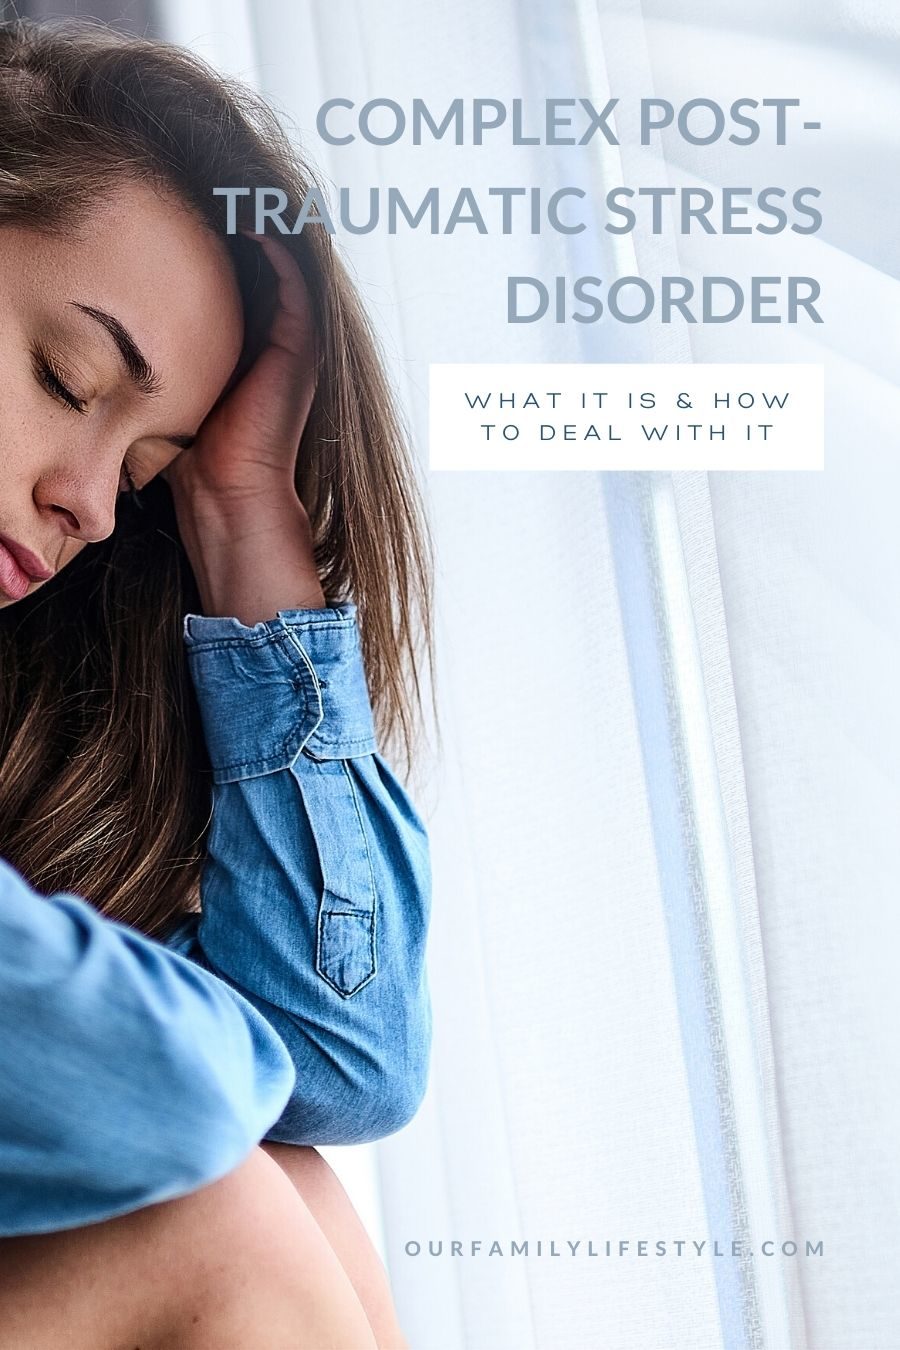 Complex Post-Traumatic Stress Disorder (CPTSD): What It Is & How To Deal With It